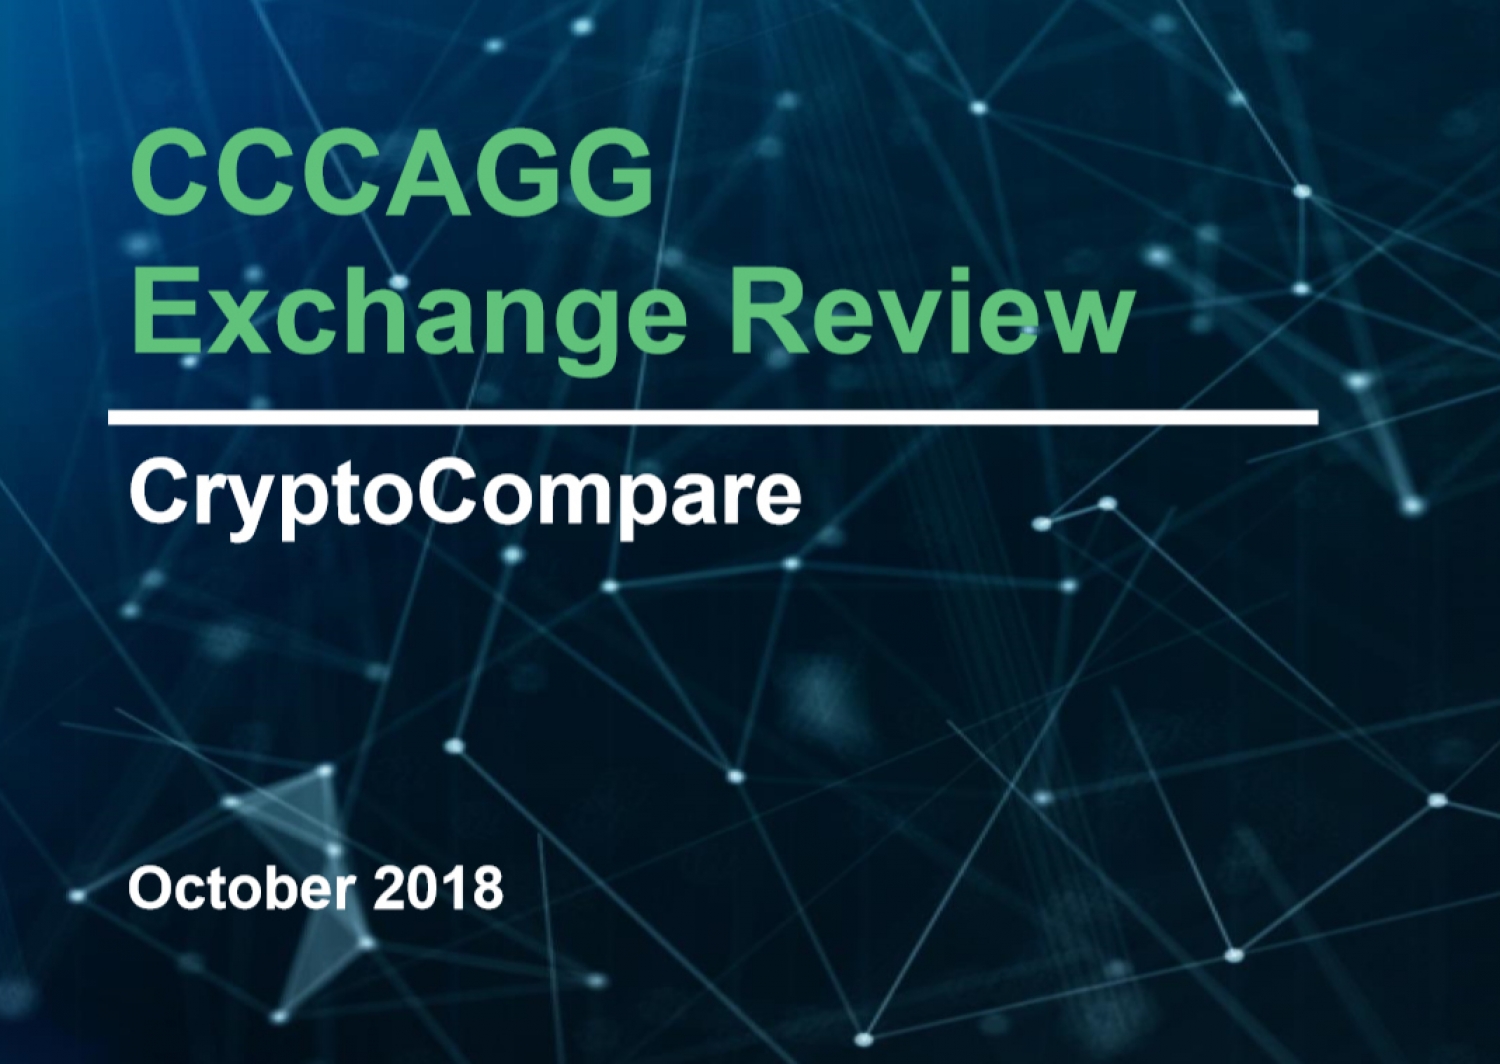 CRYPTOCOMPARE PUBLISHES LATEST MONTHLY EXCHANGE REVIEW